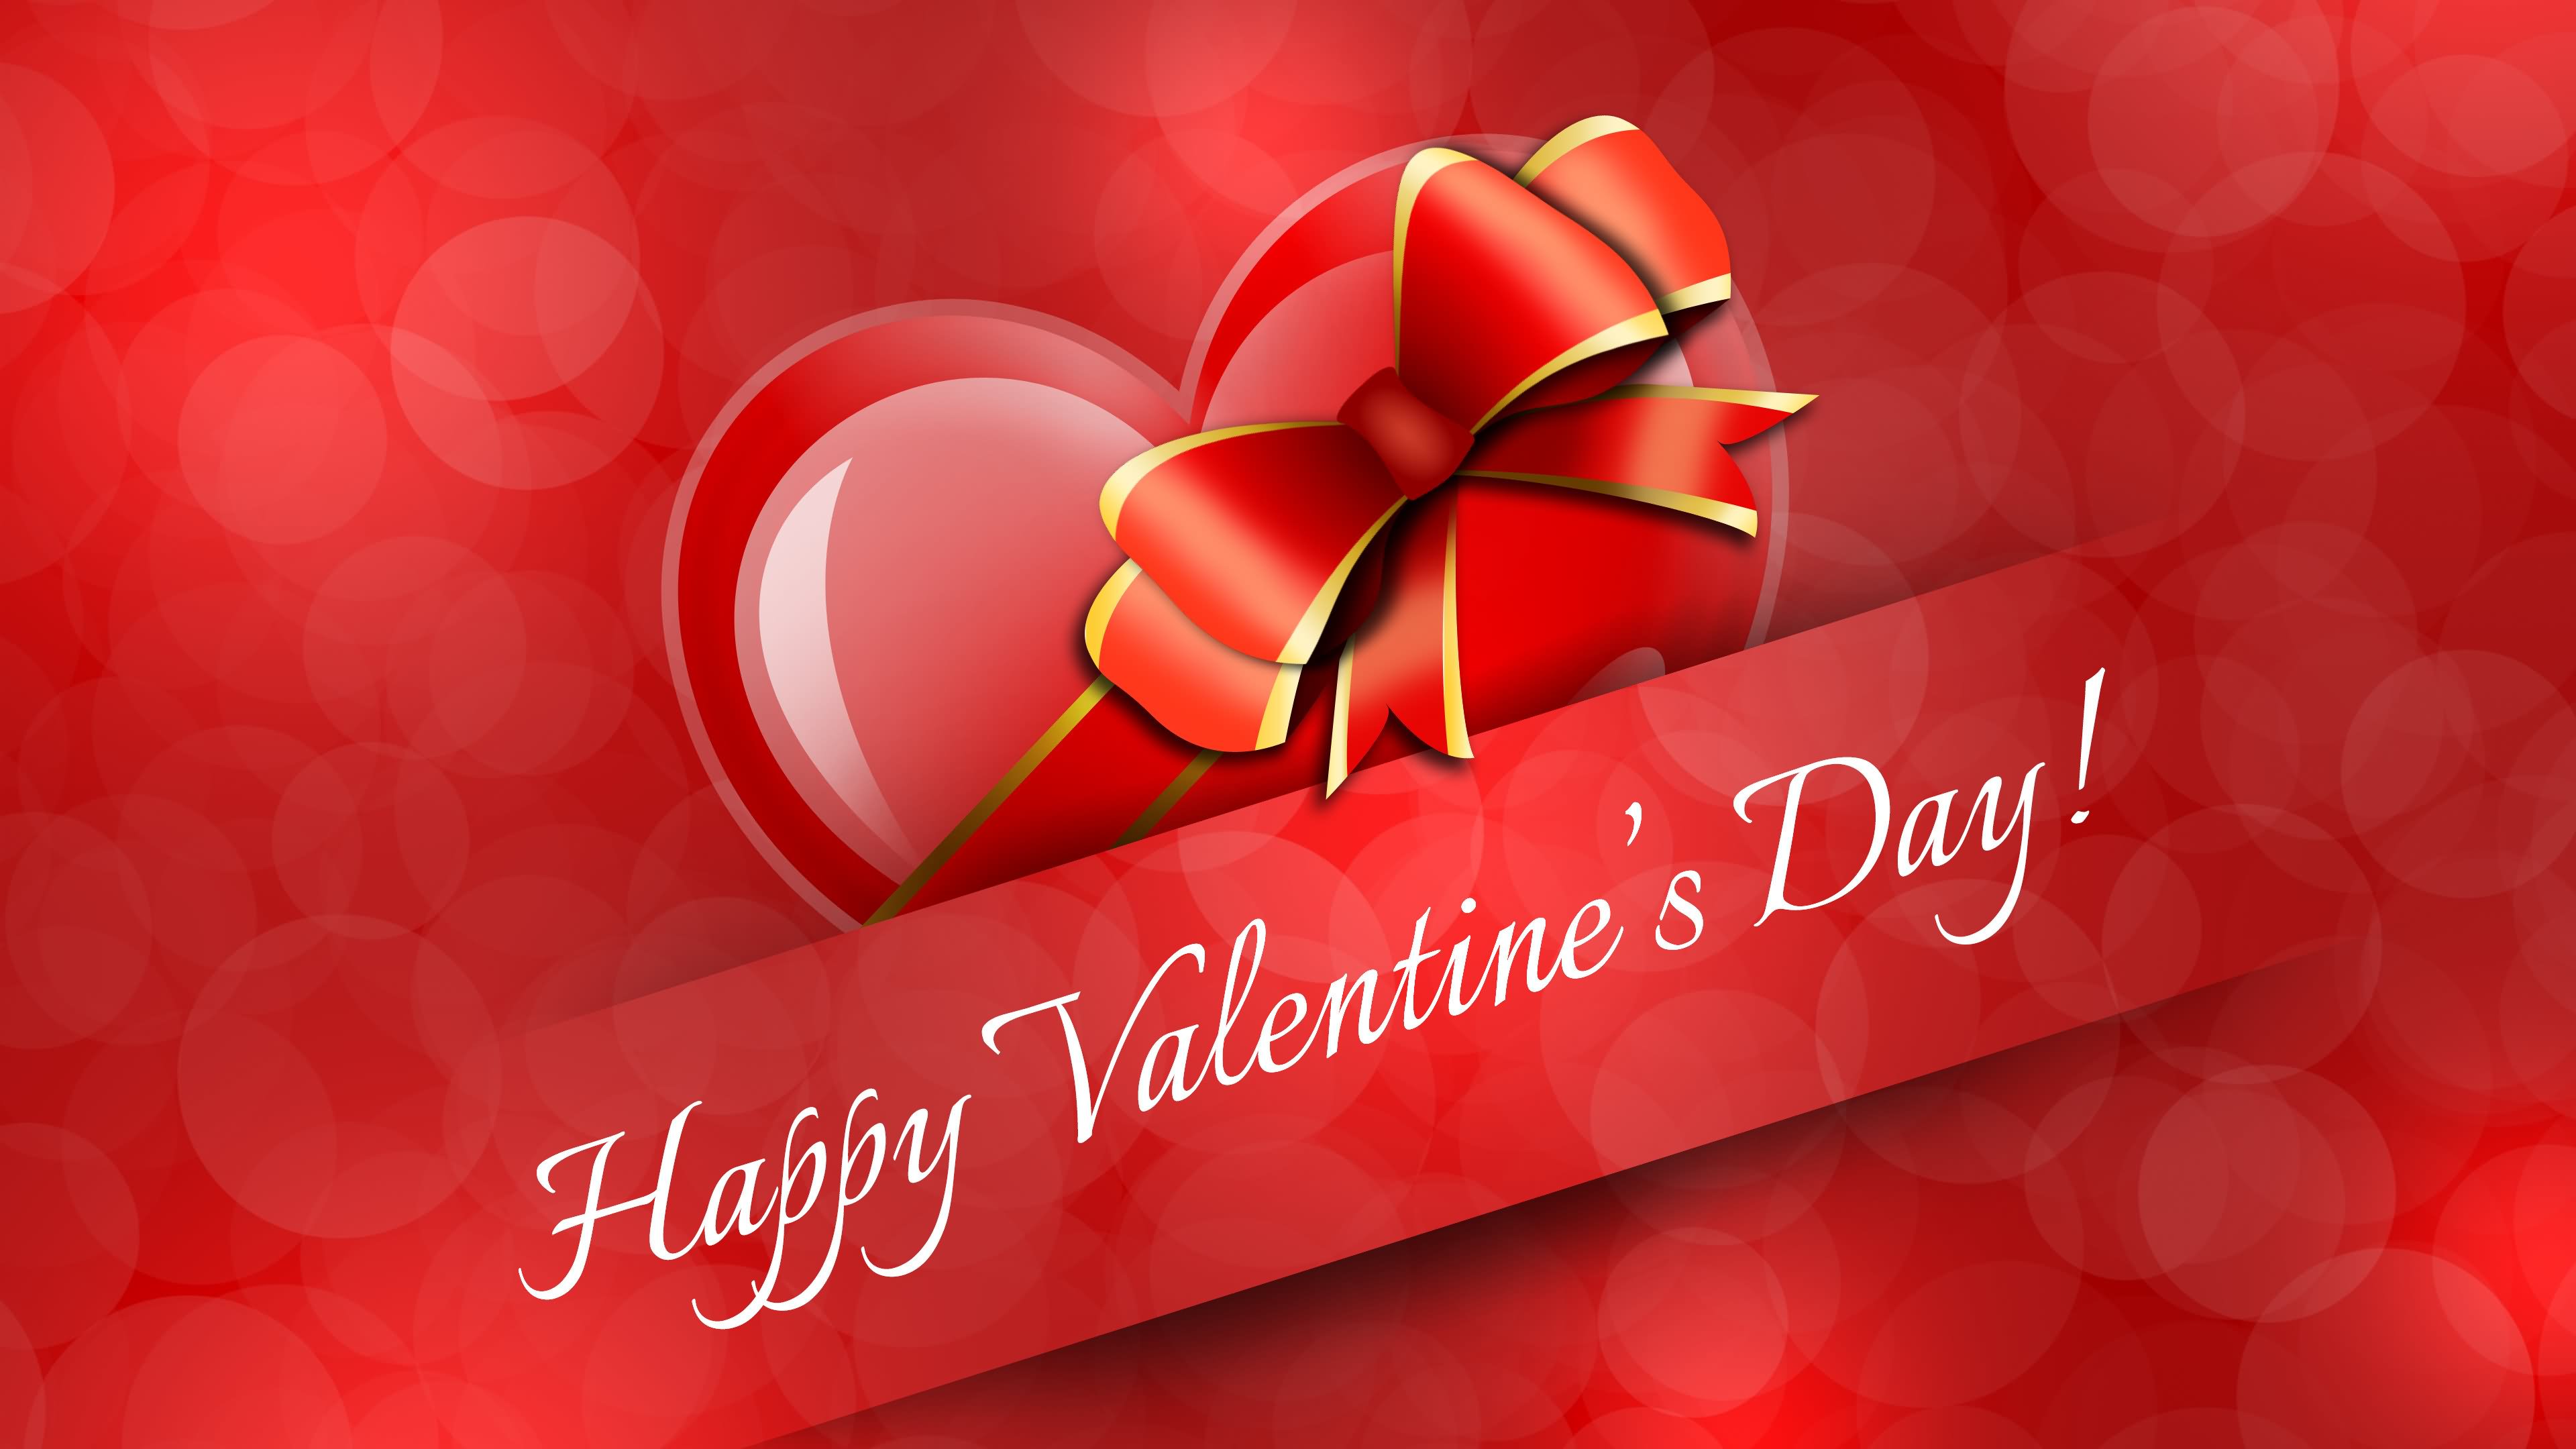 Happy Valentine's Day 2021 Pictures, HD Images, Ultra-HD ...